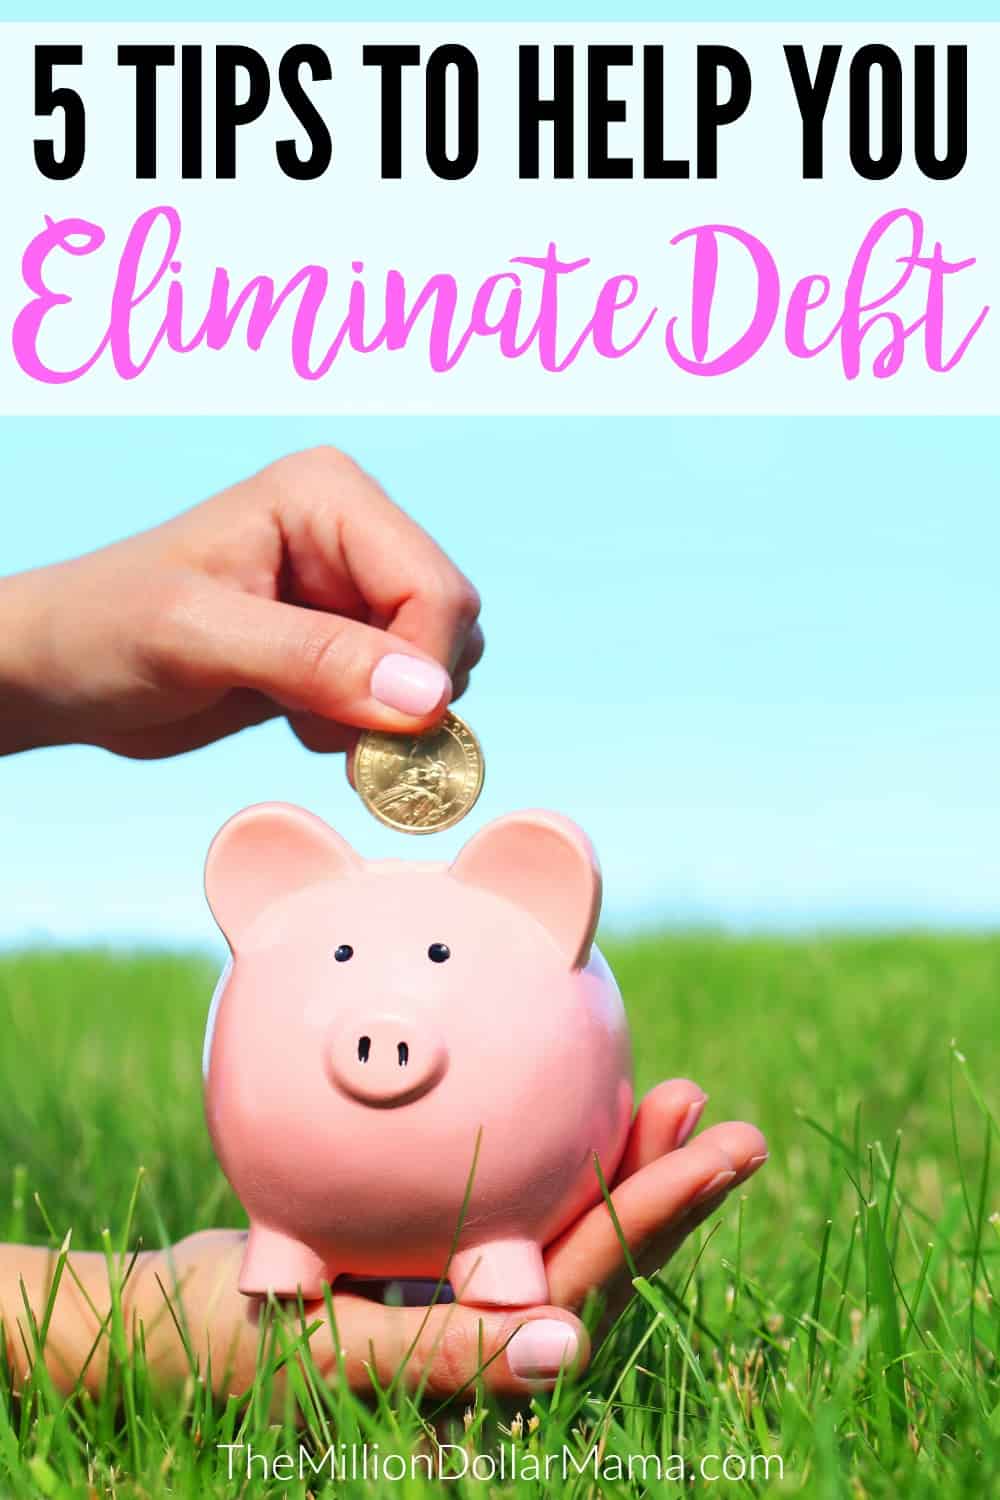 5 tips to help you get out of debt - these are some great tips that will help you eliminate your debt!